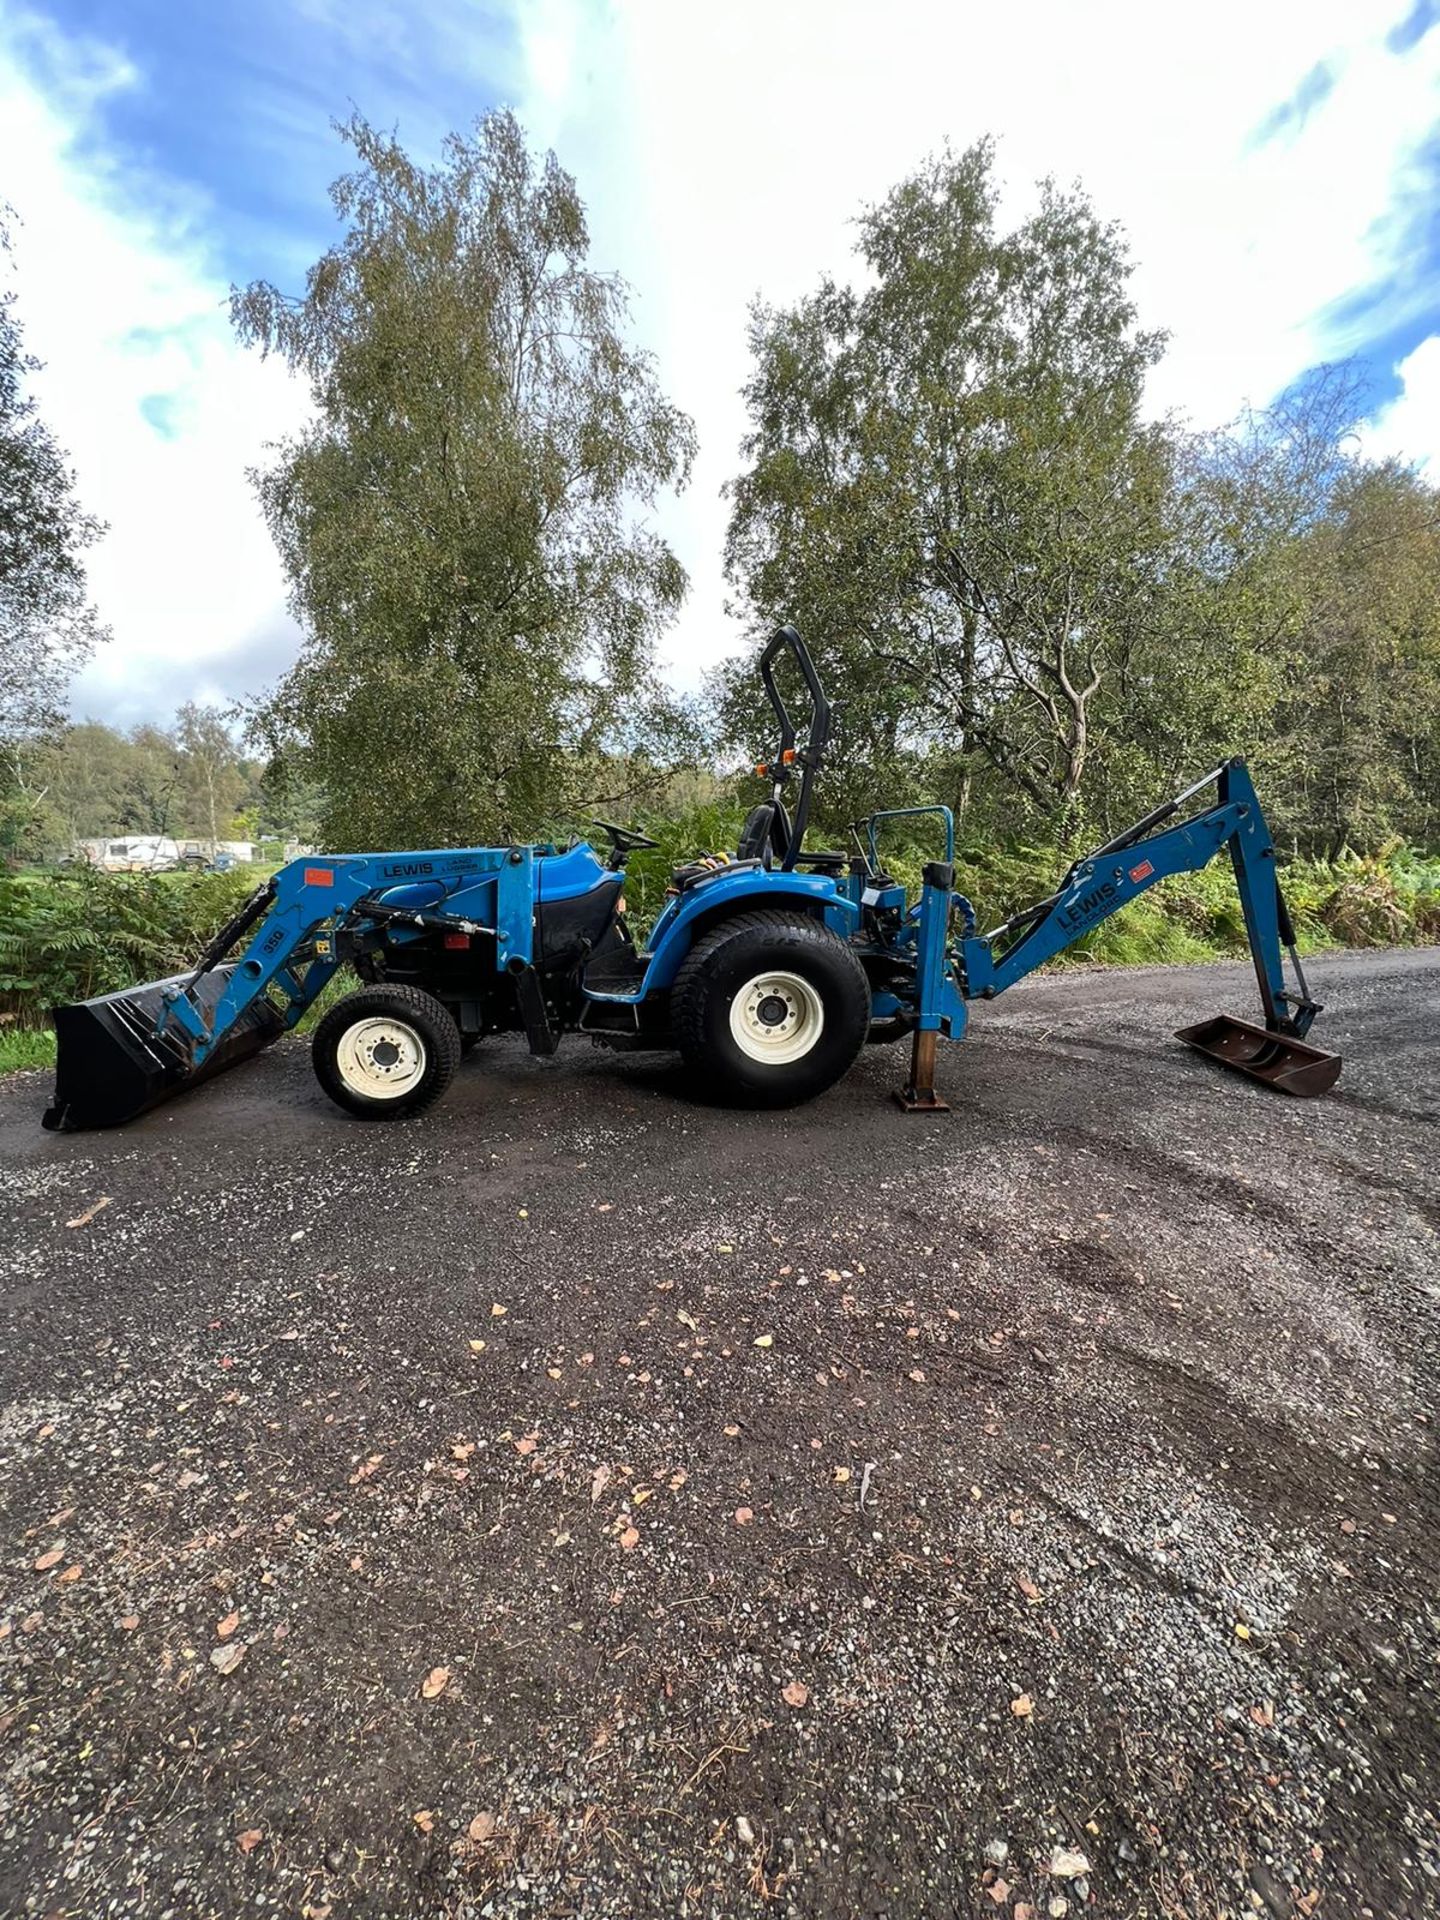 NEW HOLLAND TC27D BACK LOADER, SPOOL VALVE, ROLL PTO - Image 15 of 23